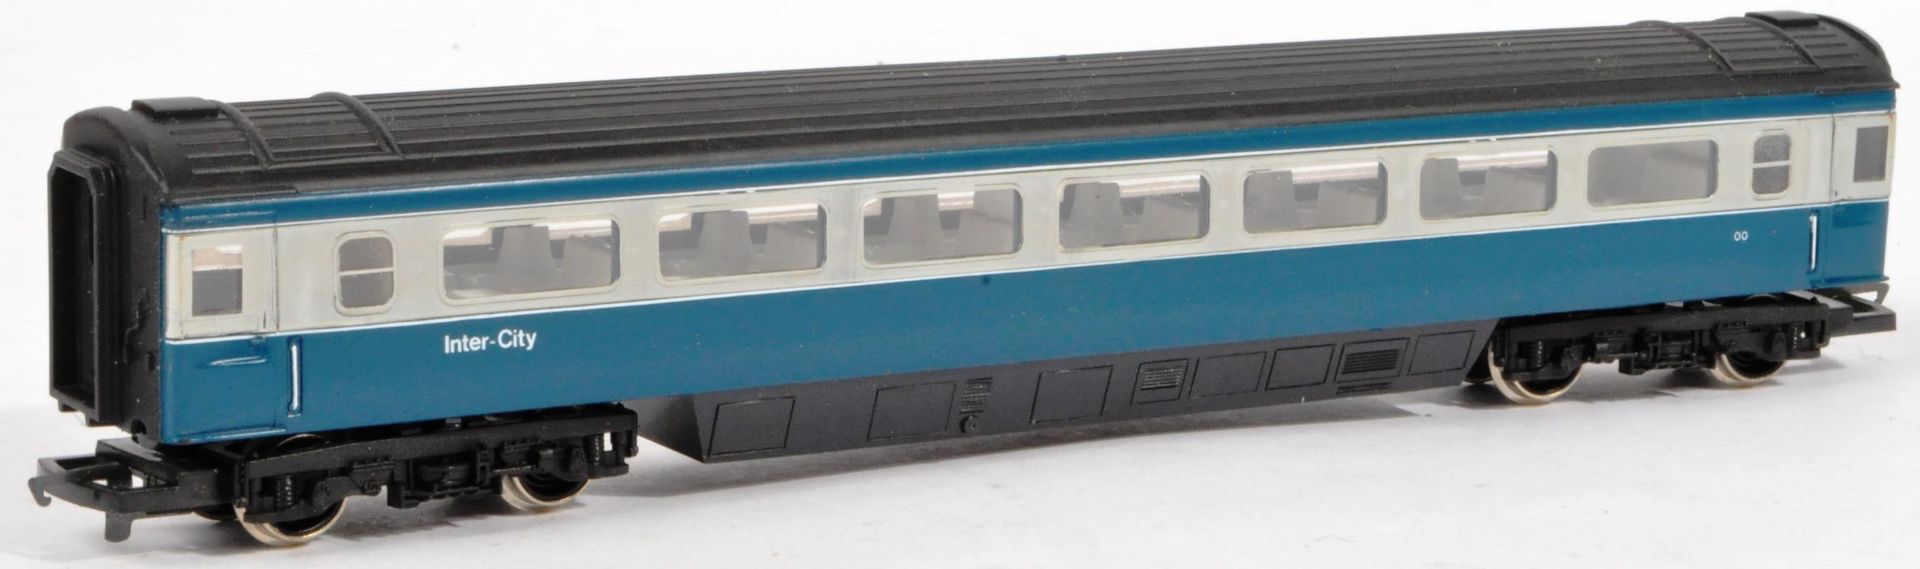 COLLECTION HORNBY 00 GAUGE MODEL RAILWAY DIESEL LOCOS & CARRIAGES - Image 9 of 9